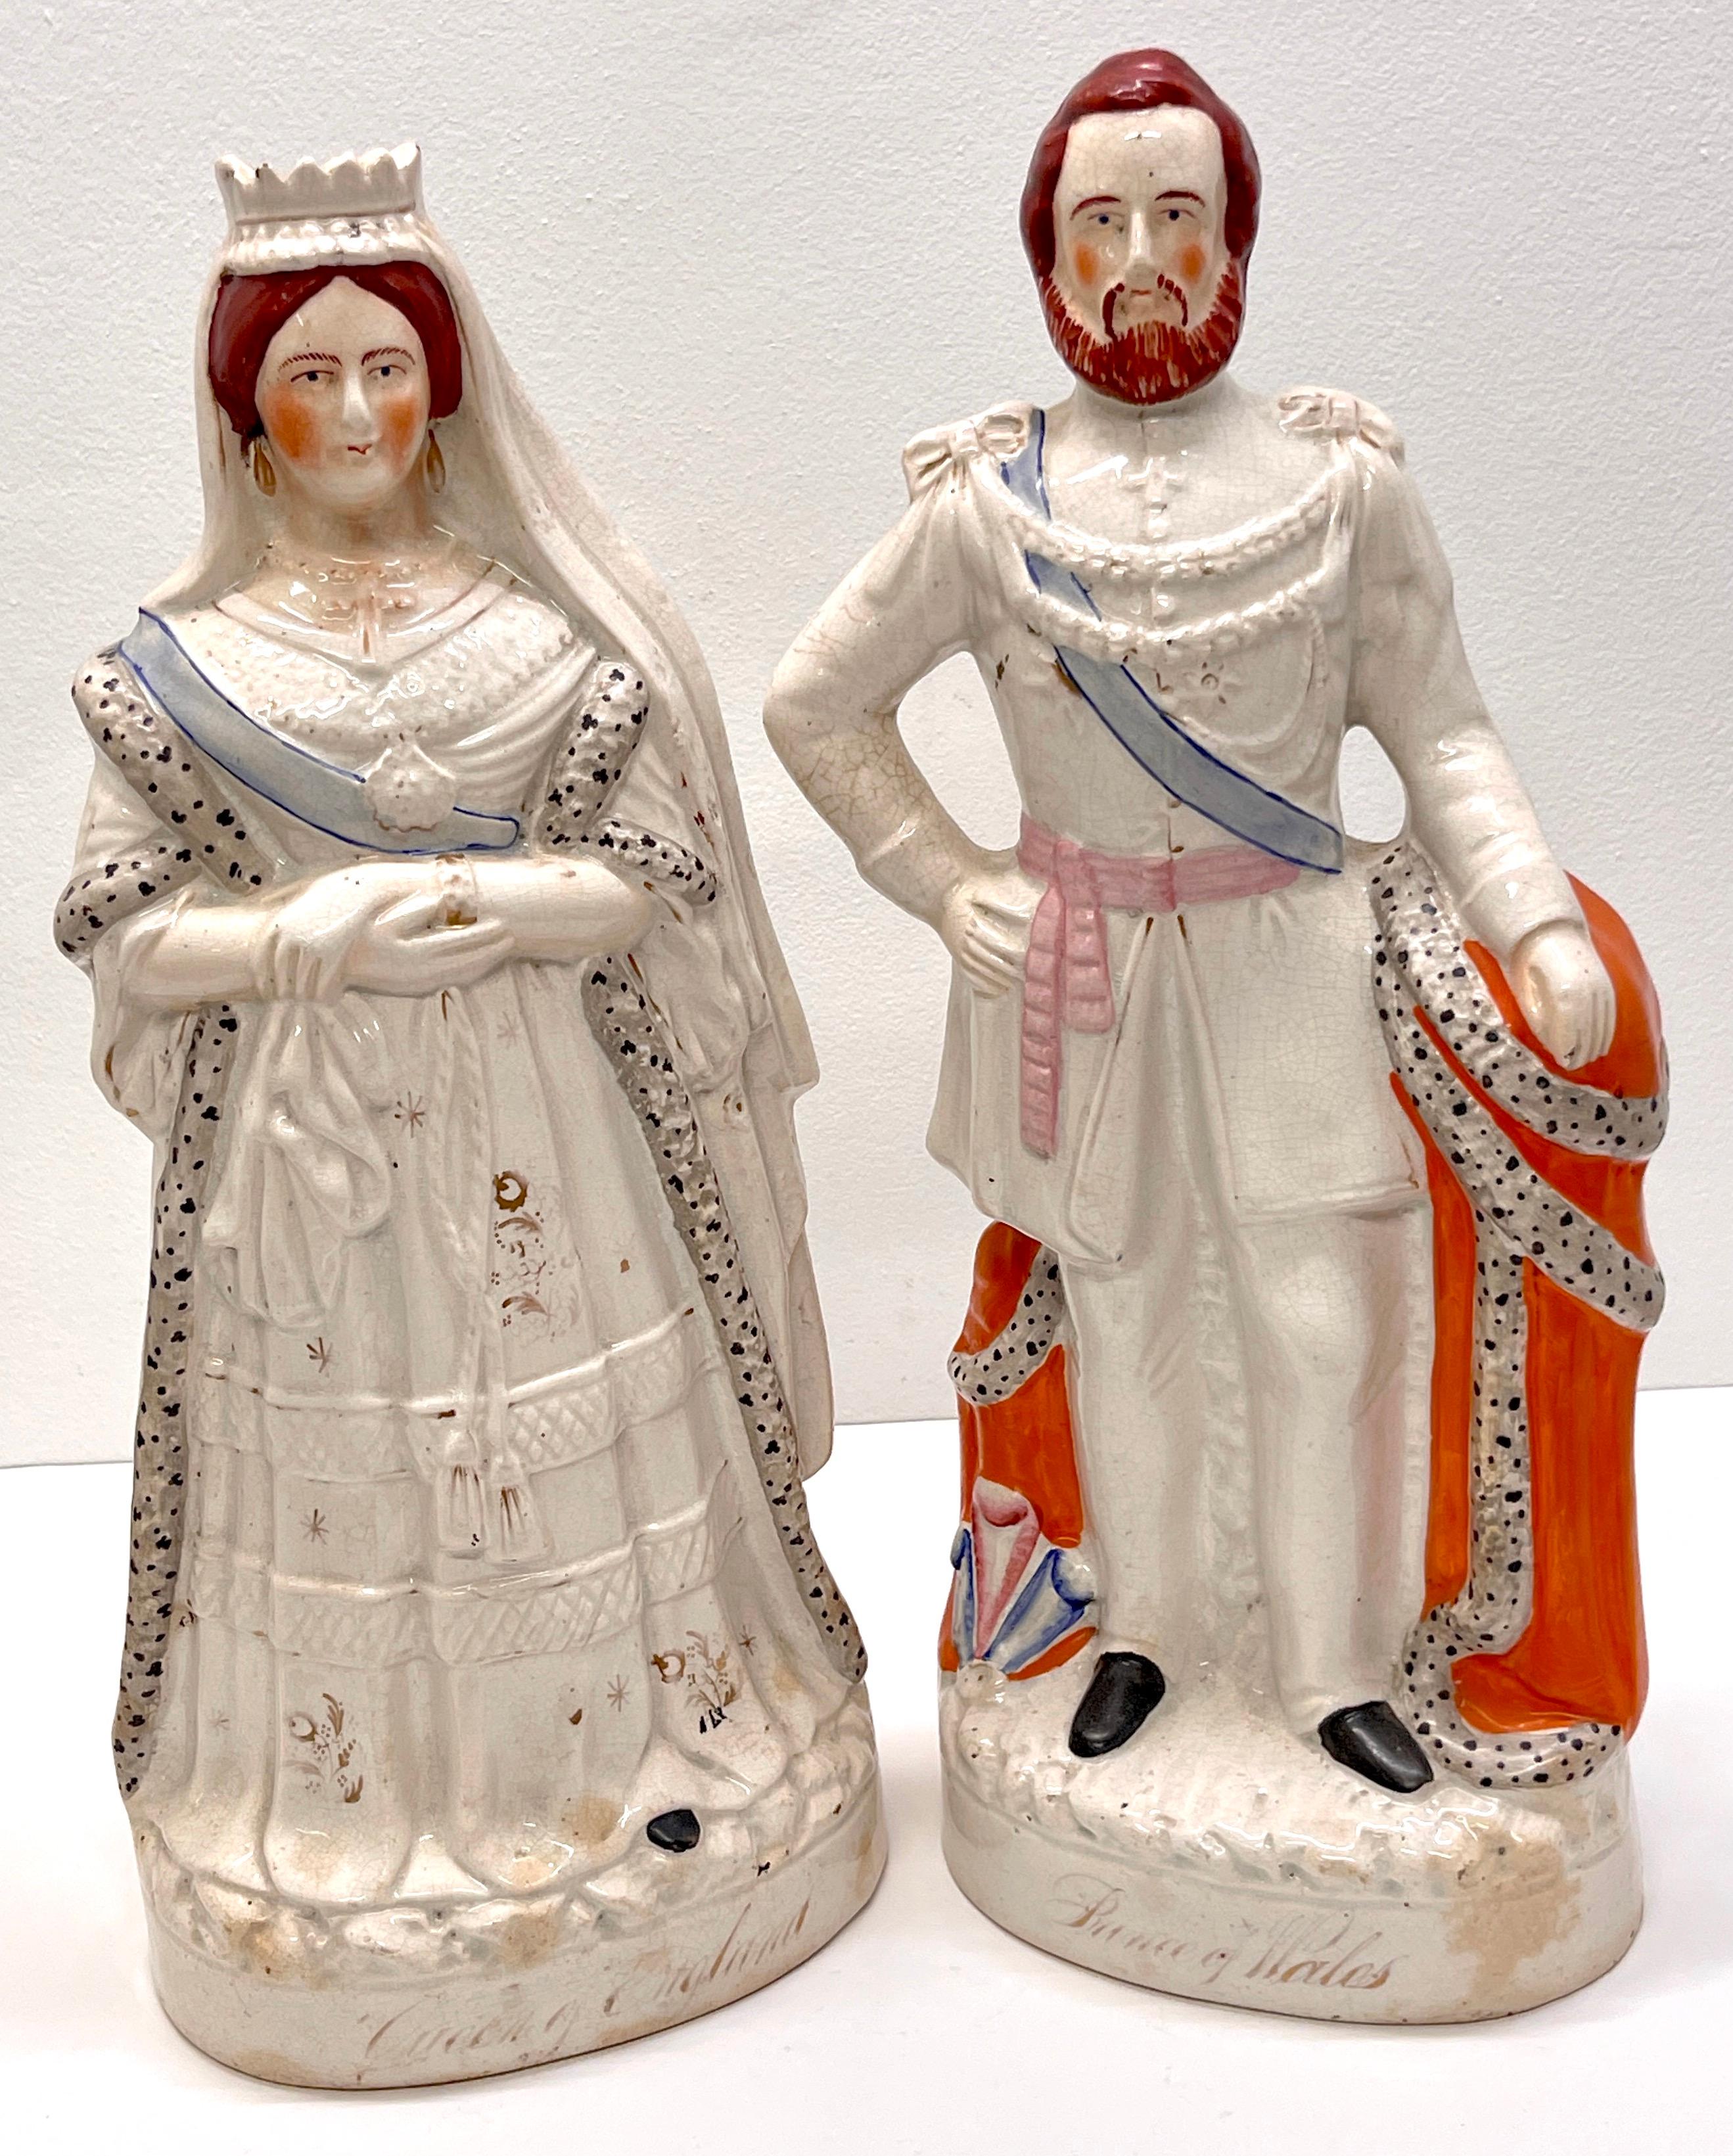 19th century Staffordshire Figurines of Queen Victoria and Prince Albert (Large)
England, circa 1860

Offering a rare find, this pair of 19th-century Staffordshire Figures portrays the iconic Queen Victoria and Prince Albert in rustic detail.